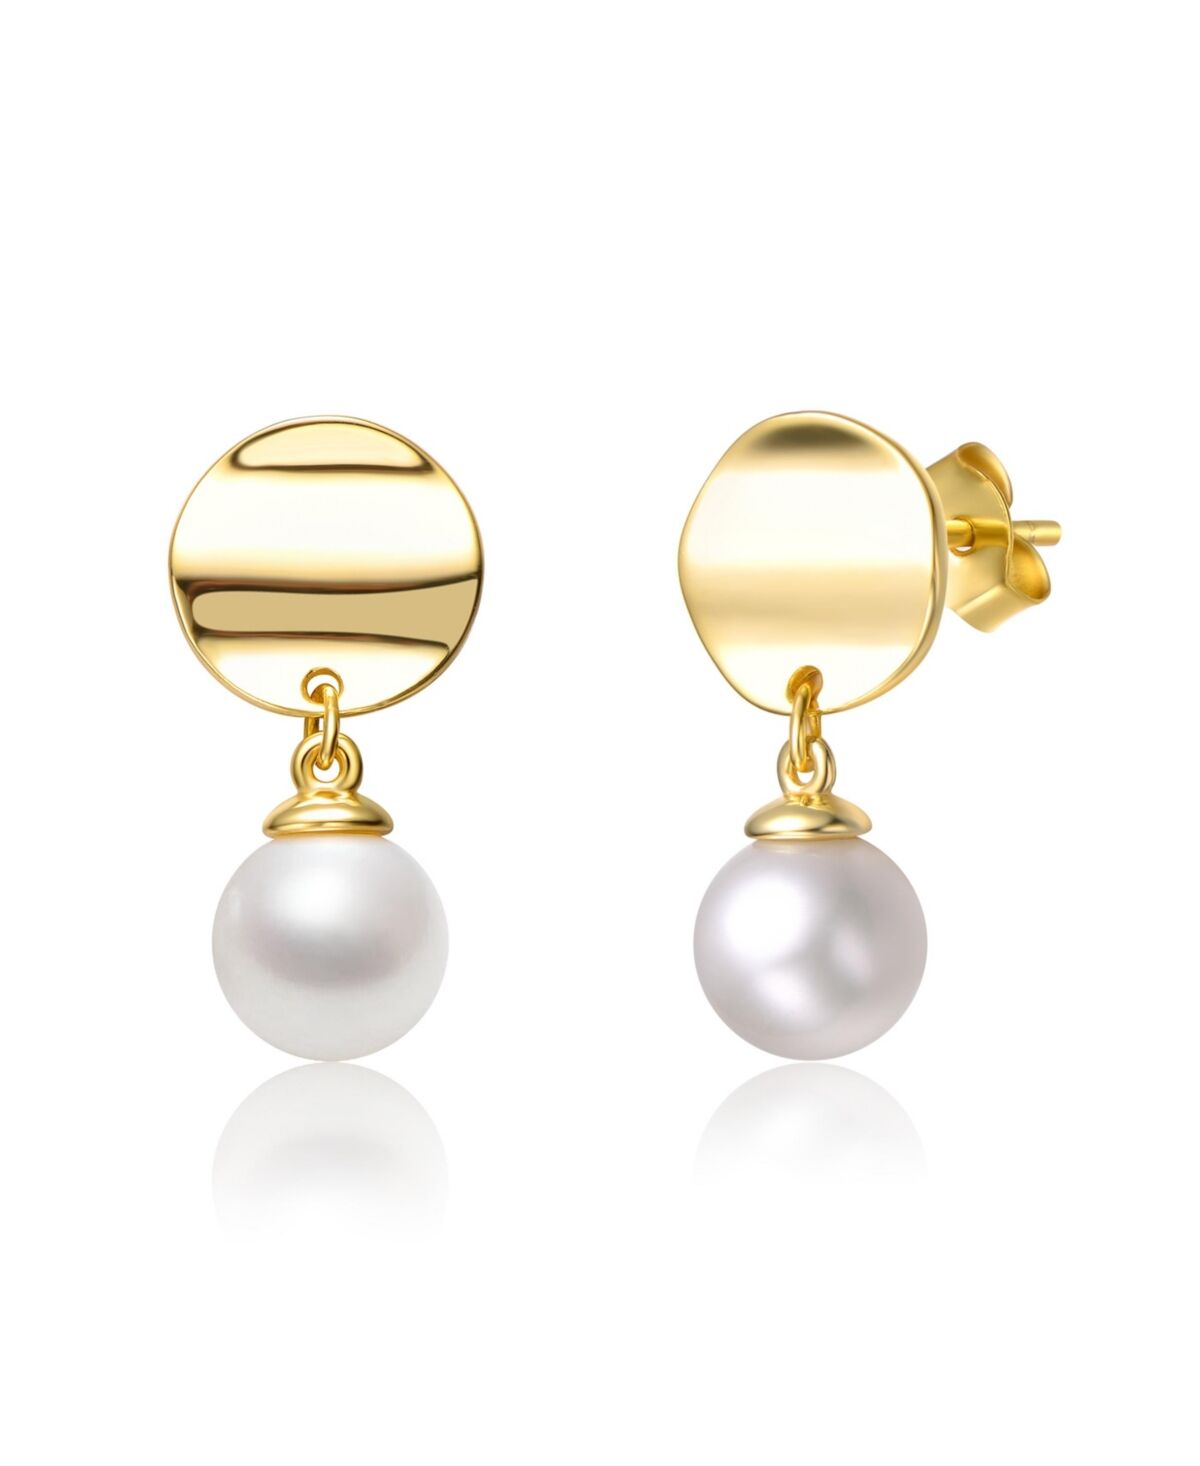 Genevive Sterling Silver & 14K Gold-Plated White Freshwater Pearl Double Drop Earrings with Gold Medallion Coin - Gold